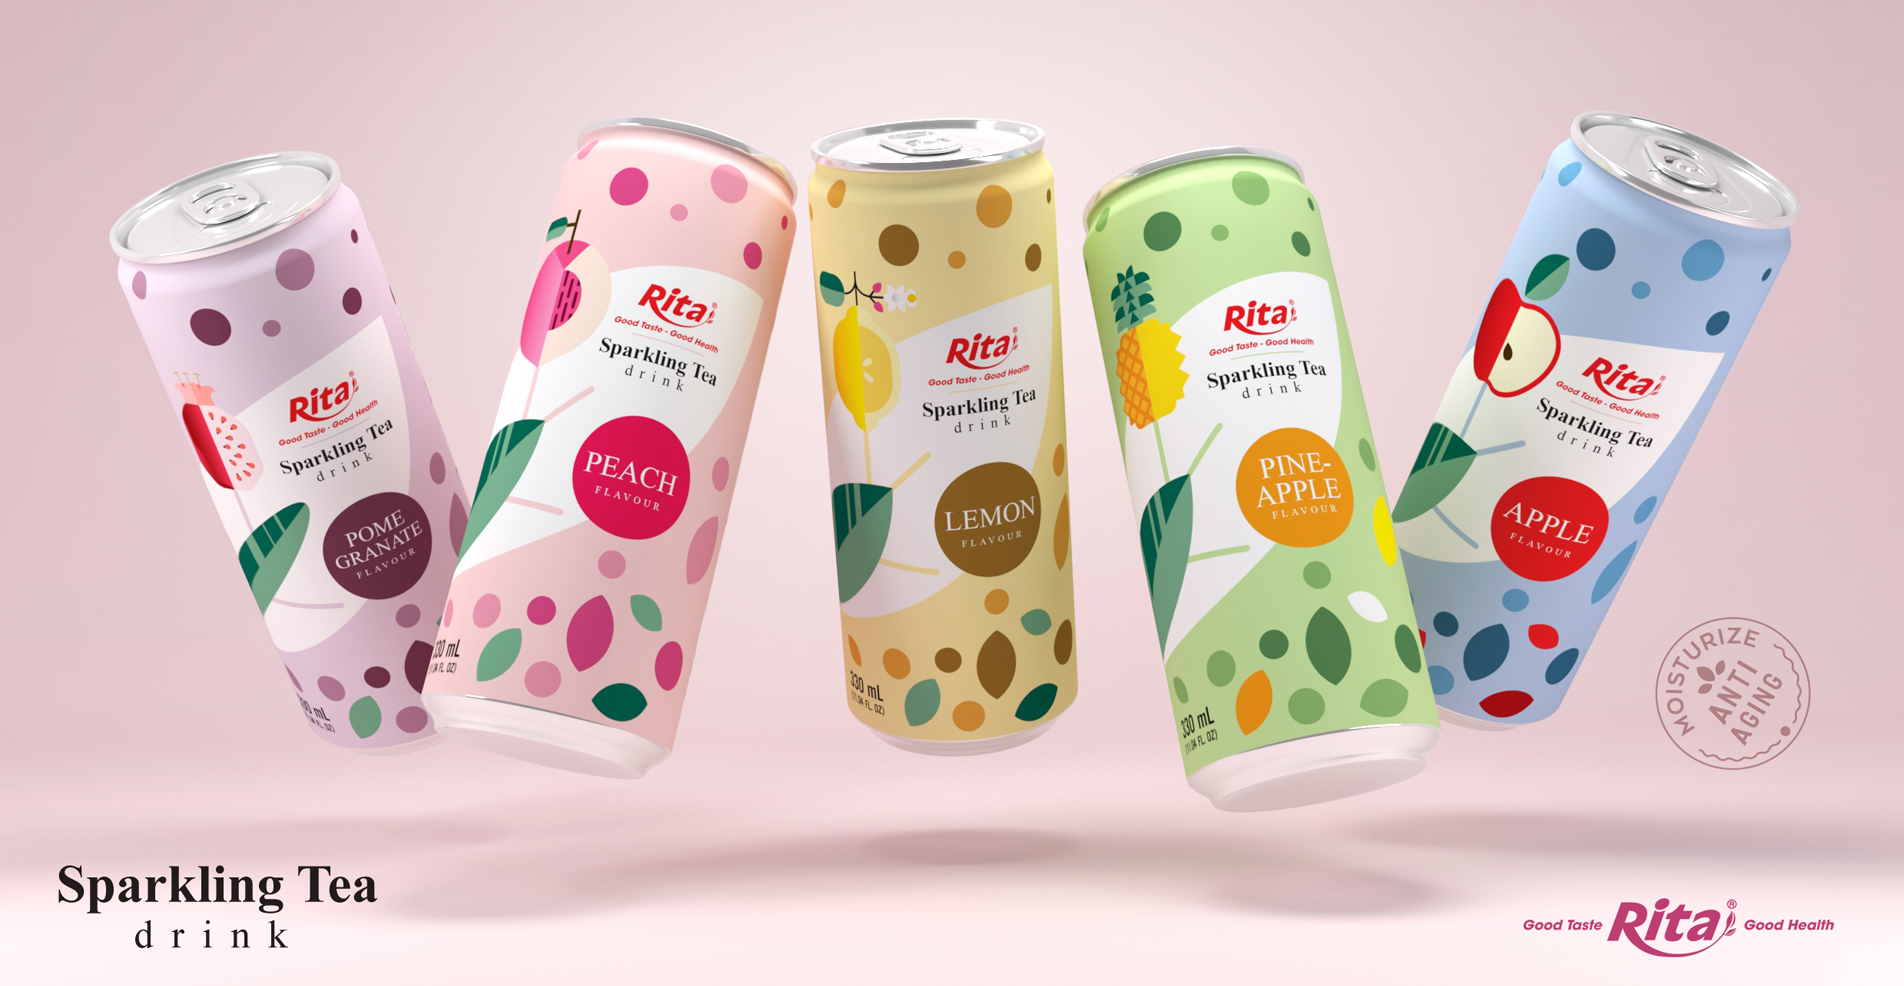 Sparkling Tea with fruit flavour from RITA own brand